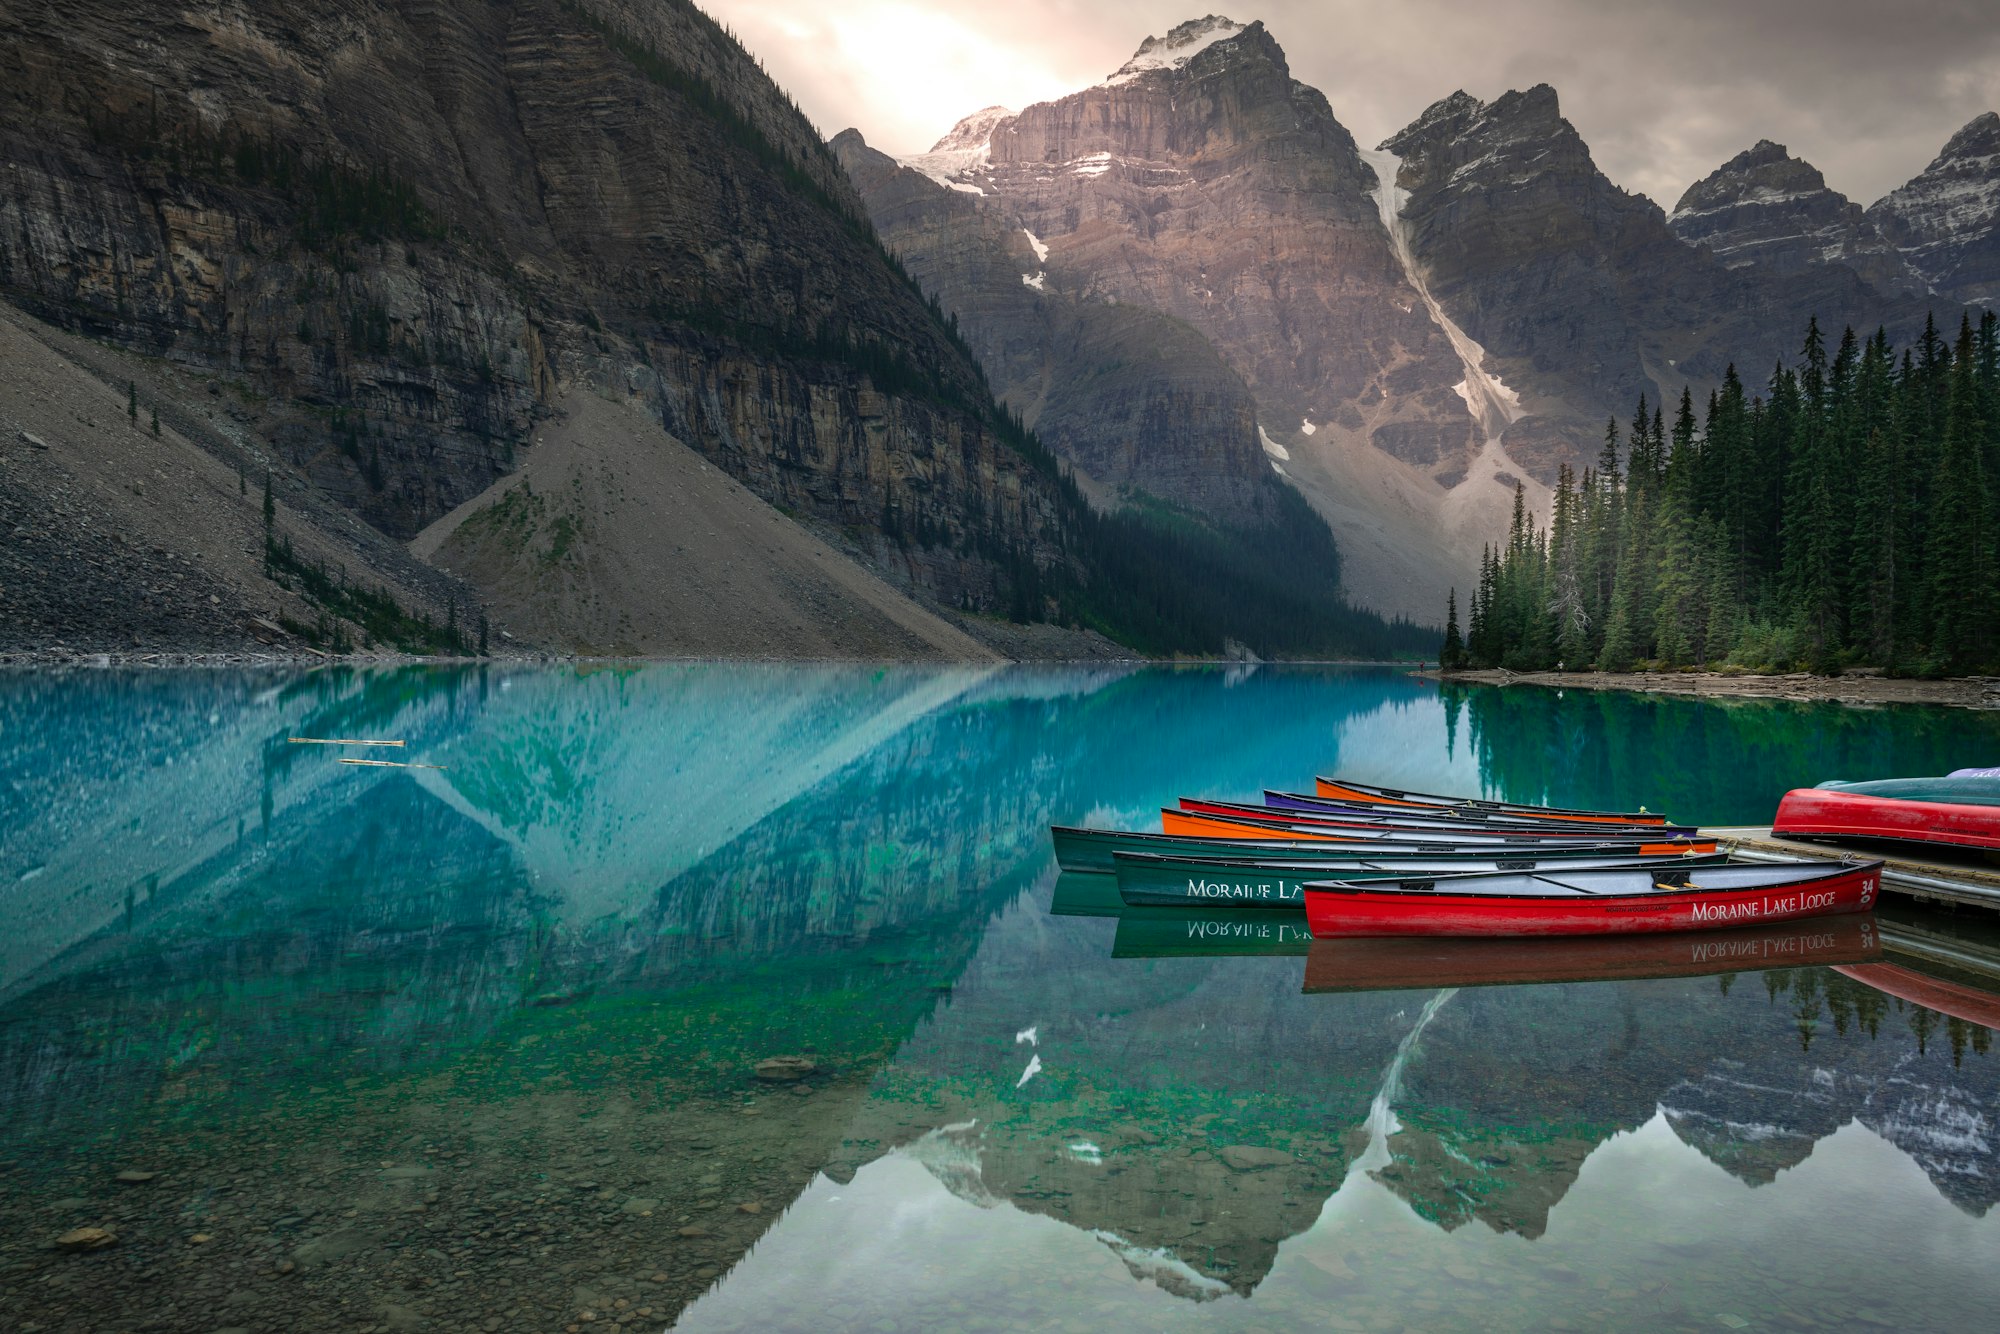 Taken in Moraine Lake, Alberta, Canada.  Moraine Lake is a glacially fed lake in Banff National Park, 14 kilometres outside the Village of Lake Louise, Alberta, Canada. It is situated in the Valley of the Ten Peaks, at an elevation of approximately 6,183 feet.

This photo has been used commercially (thanks, Unsplash!):
1.  Topaz Labs, Adjust AI Software
2.  TCL, Flagship 8-Series television set